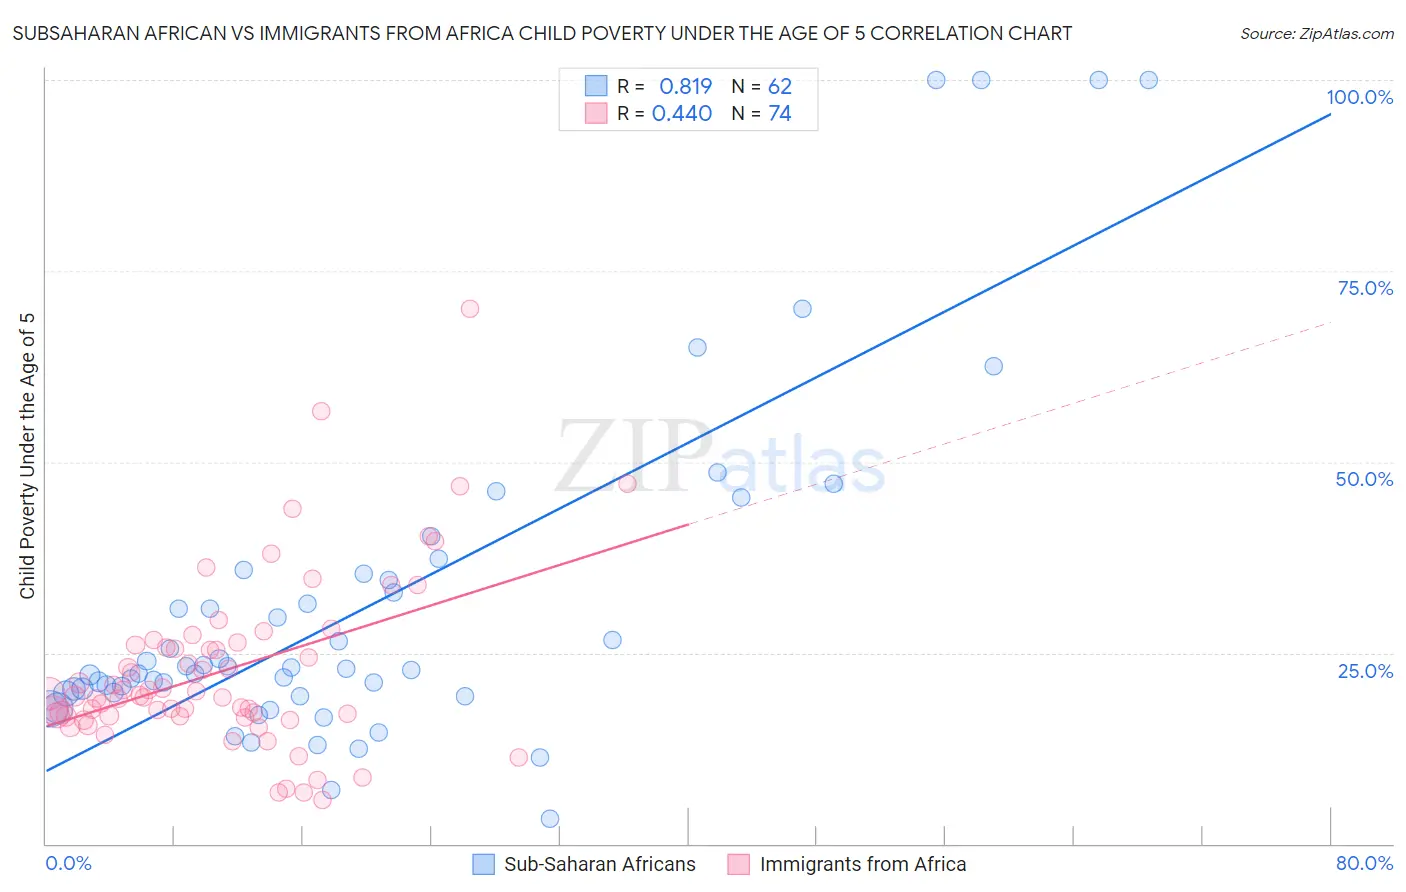 Subsaharan African vs Immigrants from Africa Child Poverty Under the Age of 5